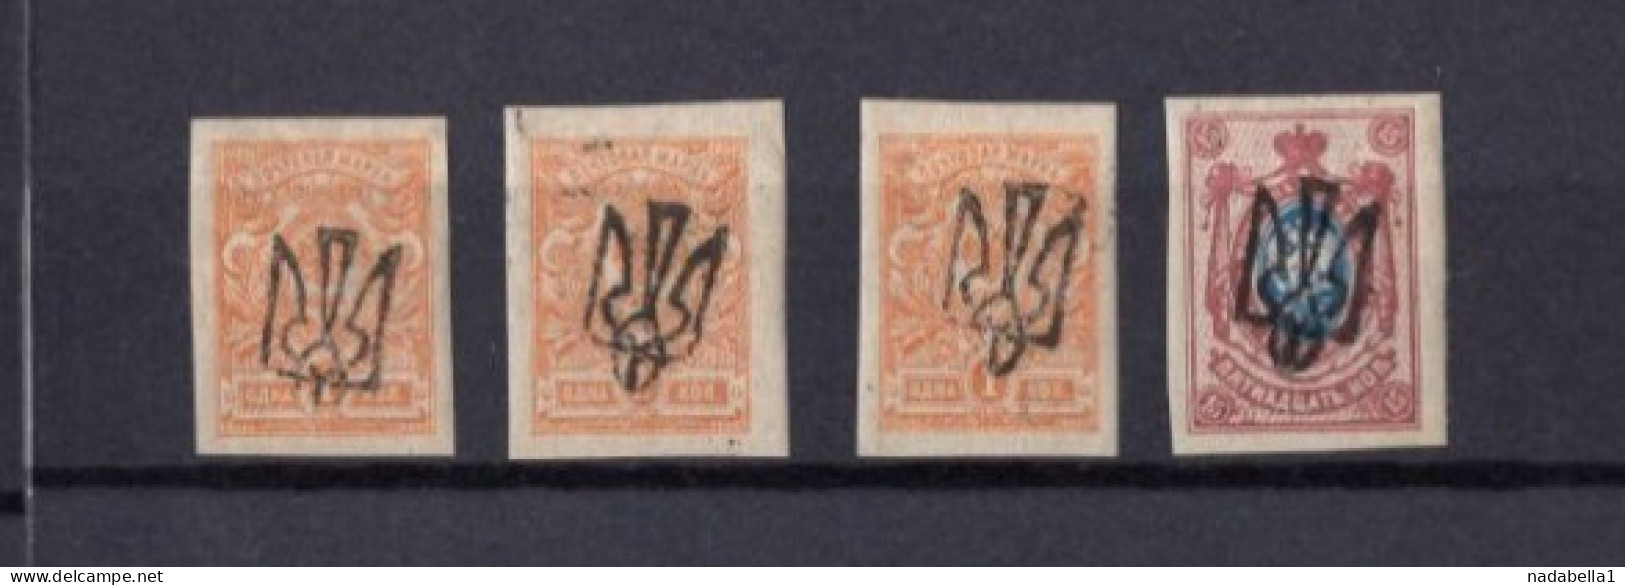 1918-1923. RUSSIA,UKRAINE,OVERPRINT,ODESS AND POLTAVA REGIONAL ISSUE,7 POSTAL STAMPS,USED,MH - Neufs